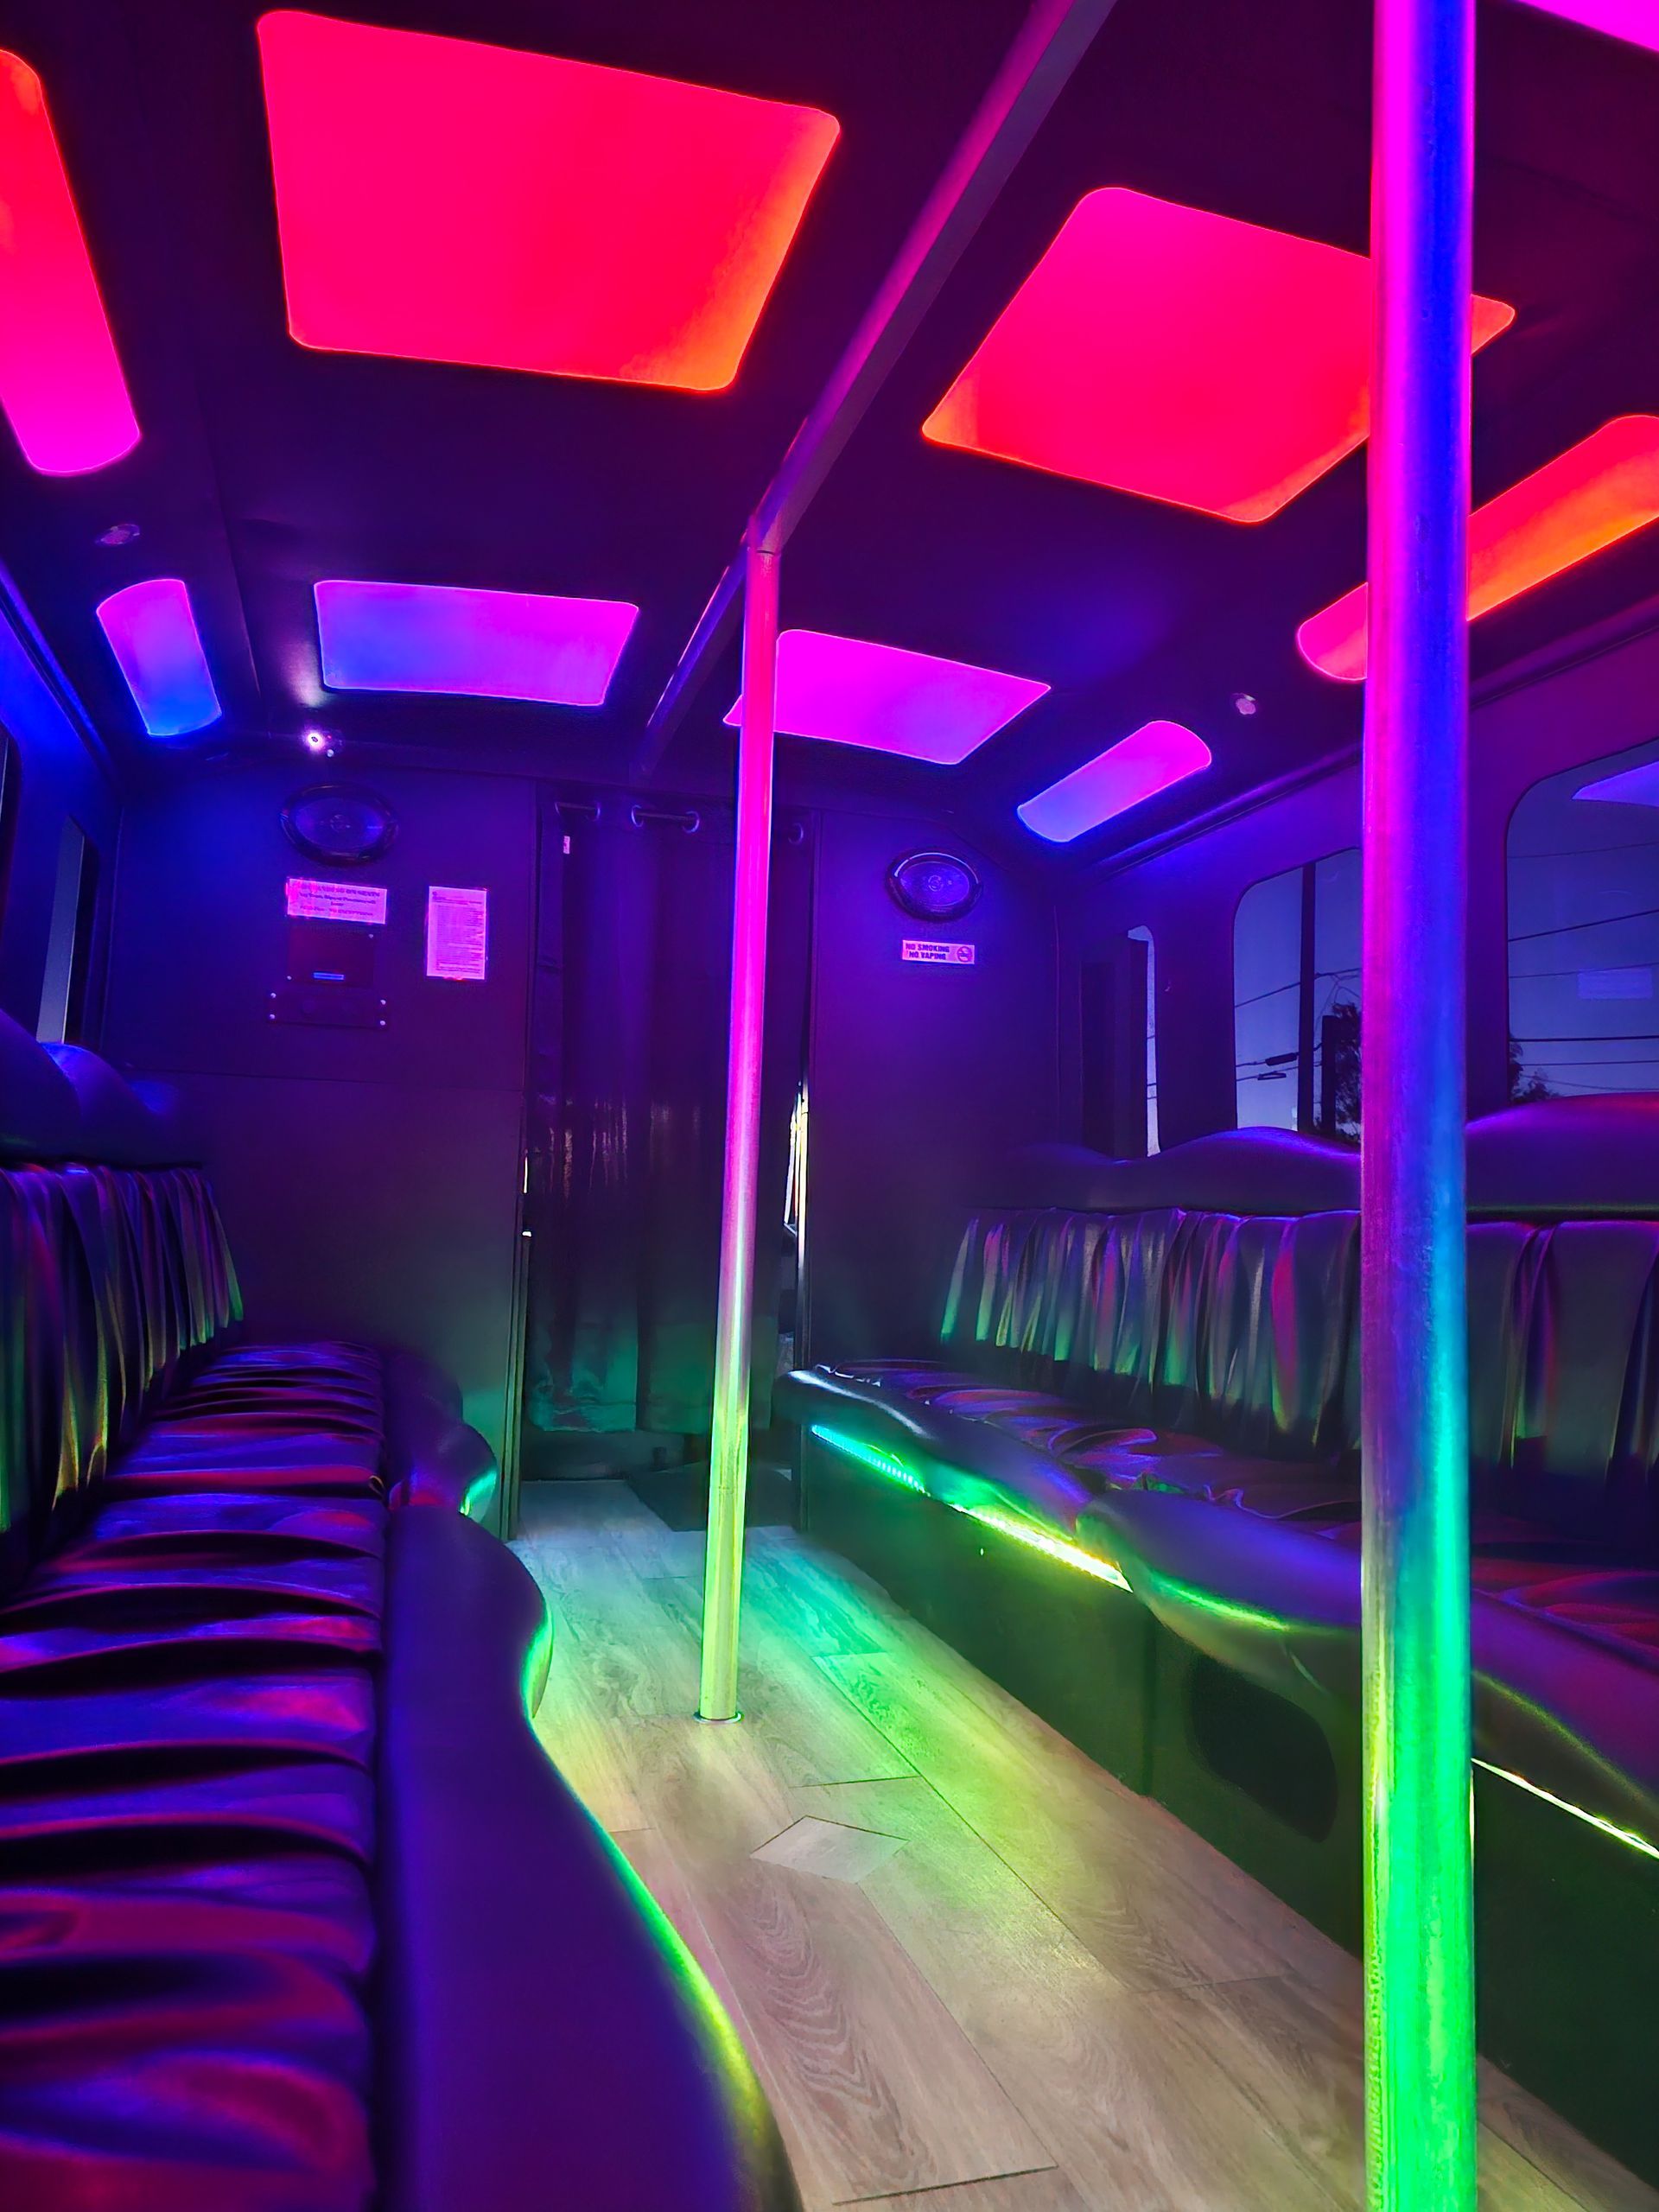 SATX San Antonio party bus interior view with pole for up to 20 passengers